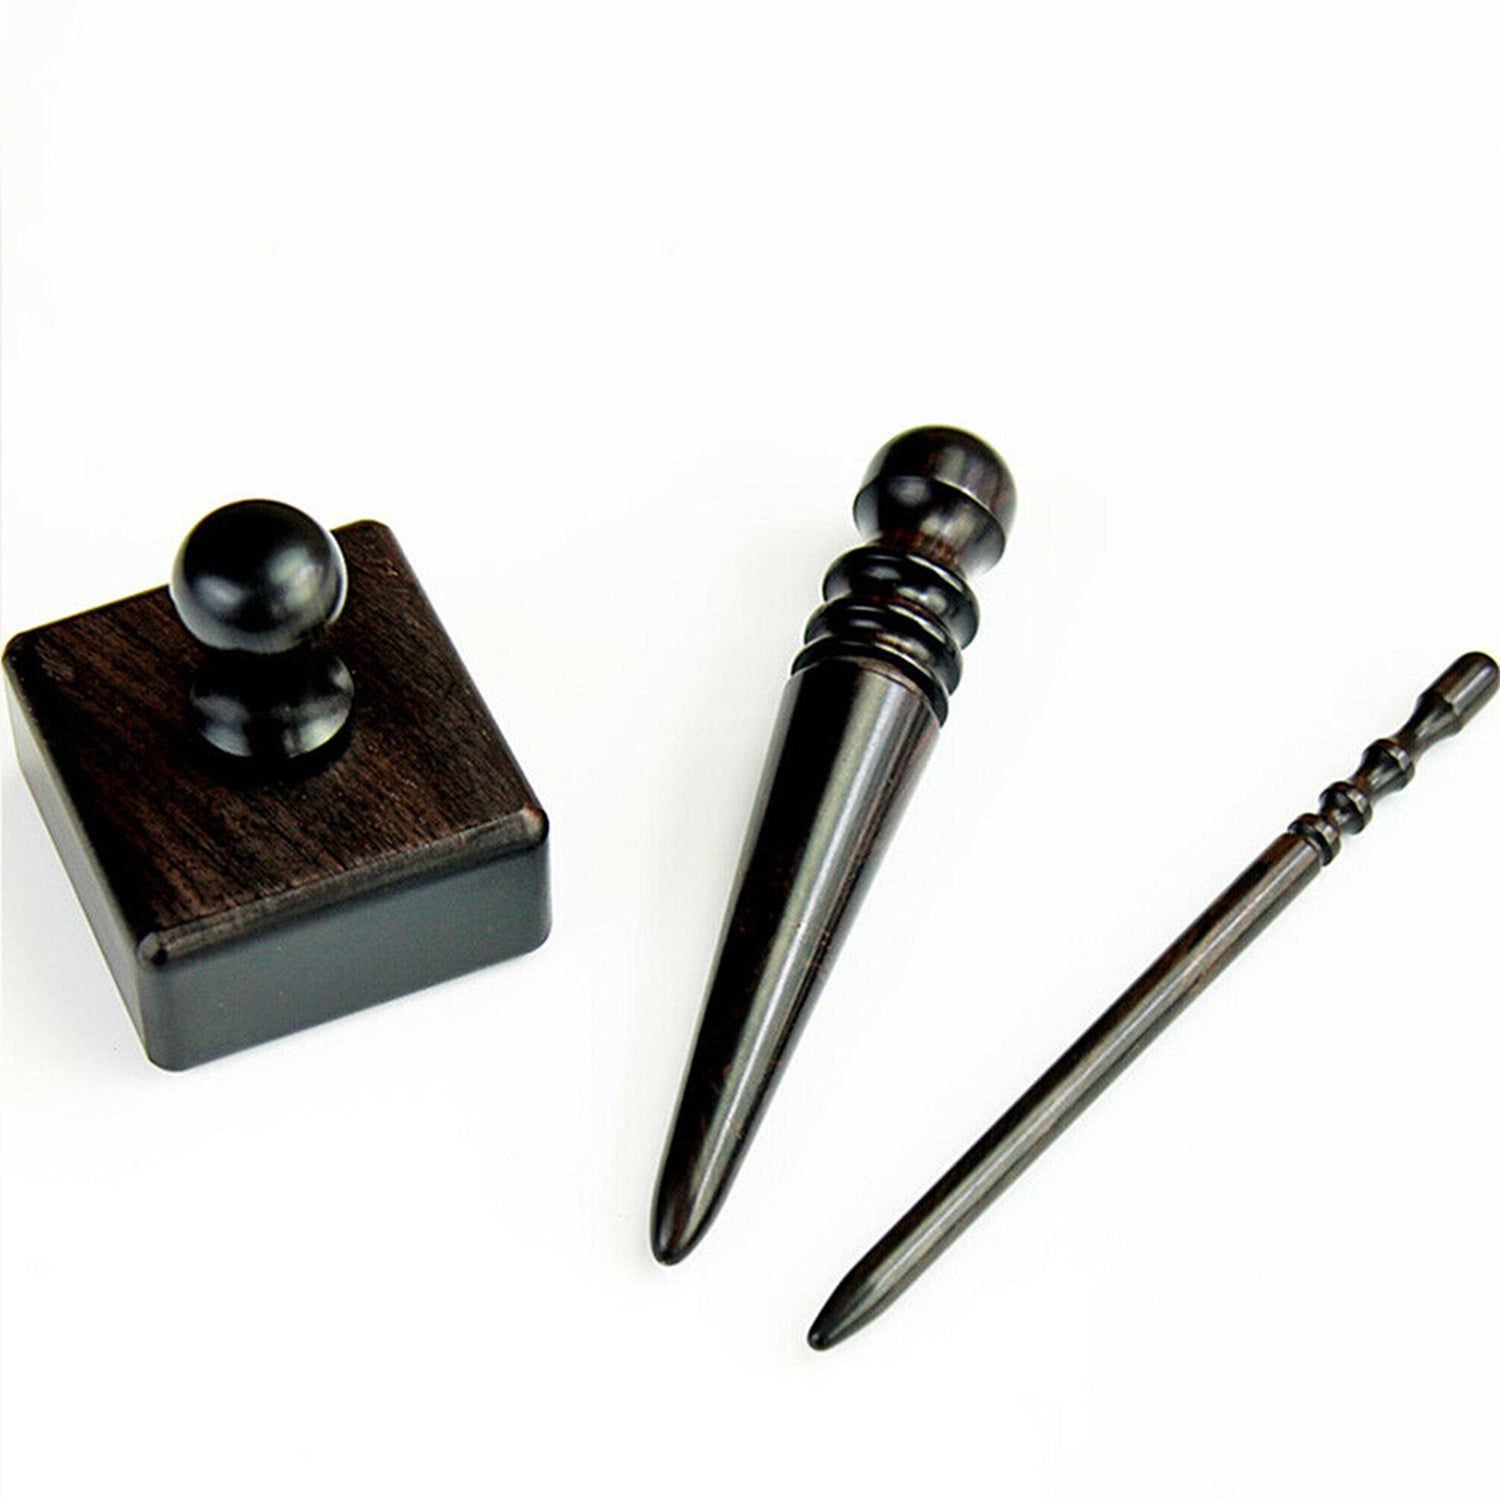 Do you prefer beech (?) or ebony edge burnishing tools, and why